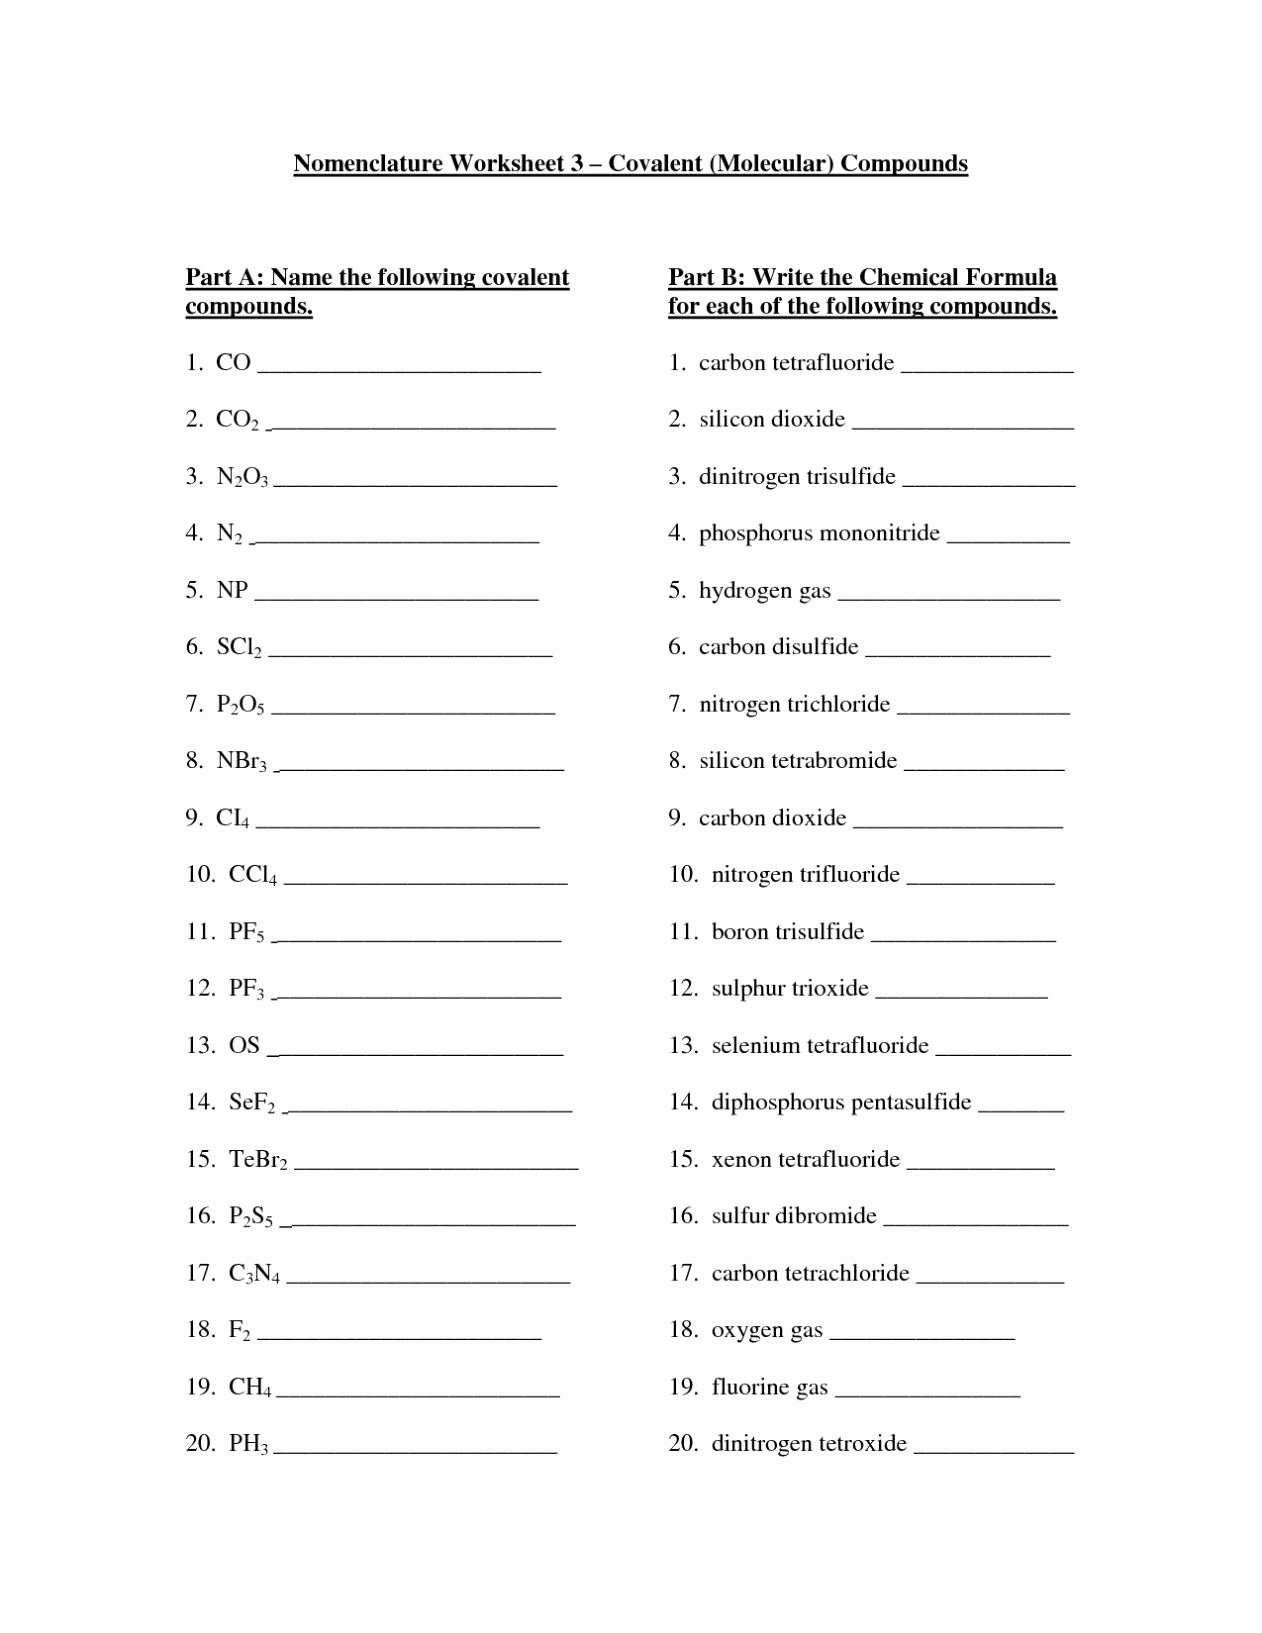 Ionic and Covalent Bonds Worksheet Luxury Naming Ionic and Covalent Pounds Worksheet Answer Key